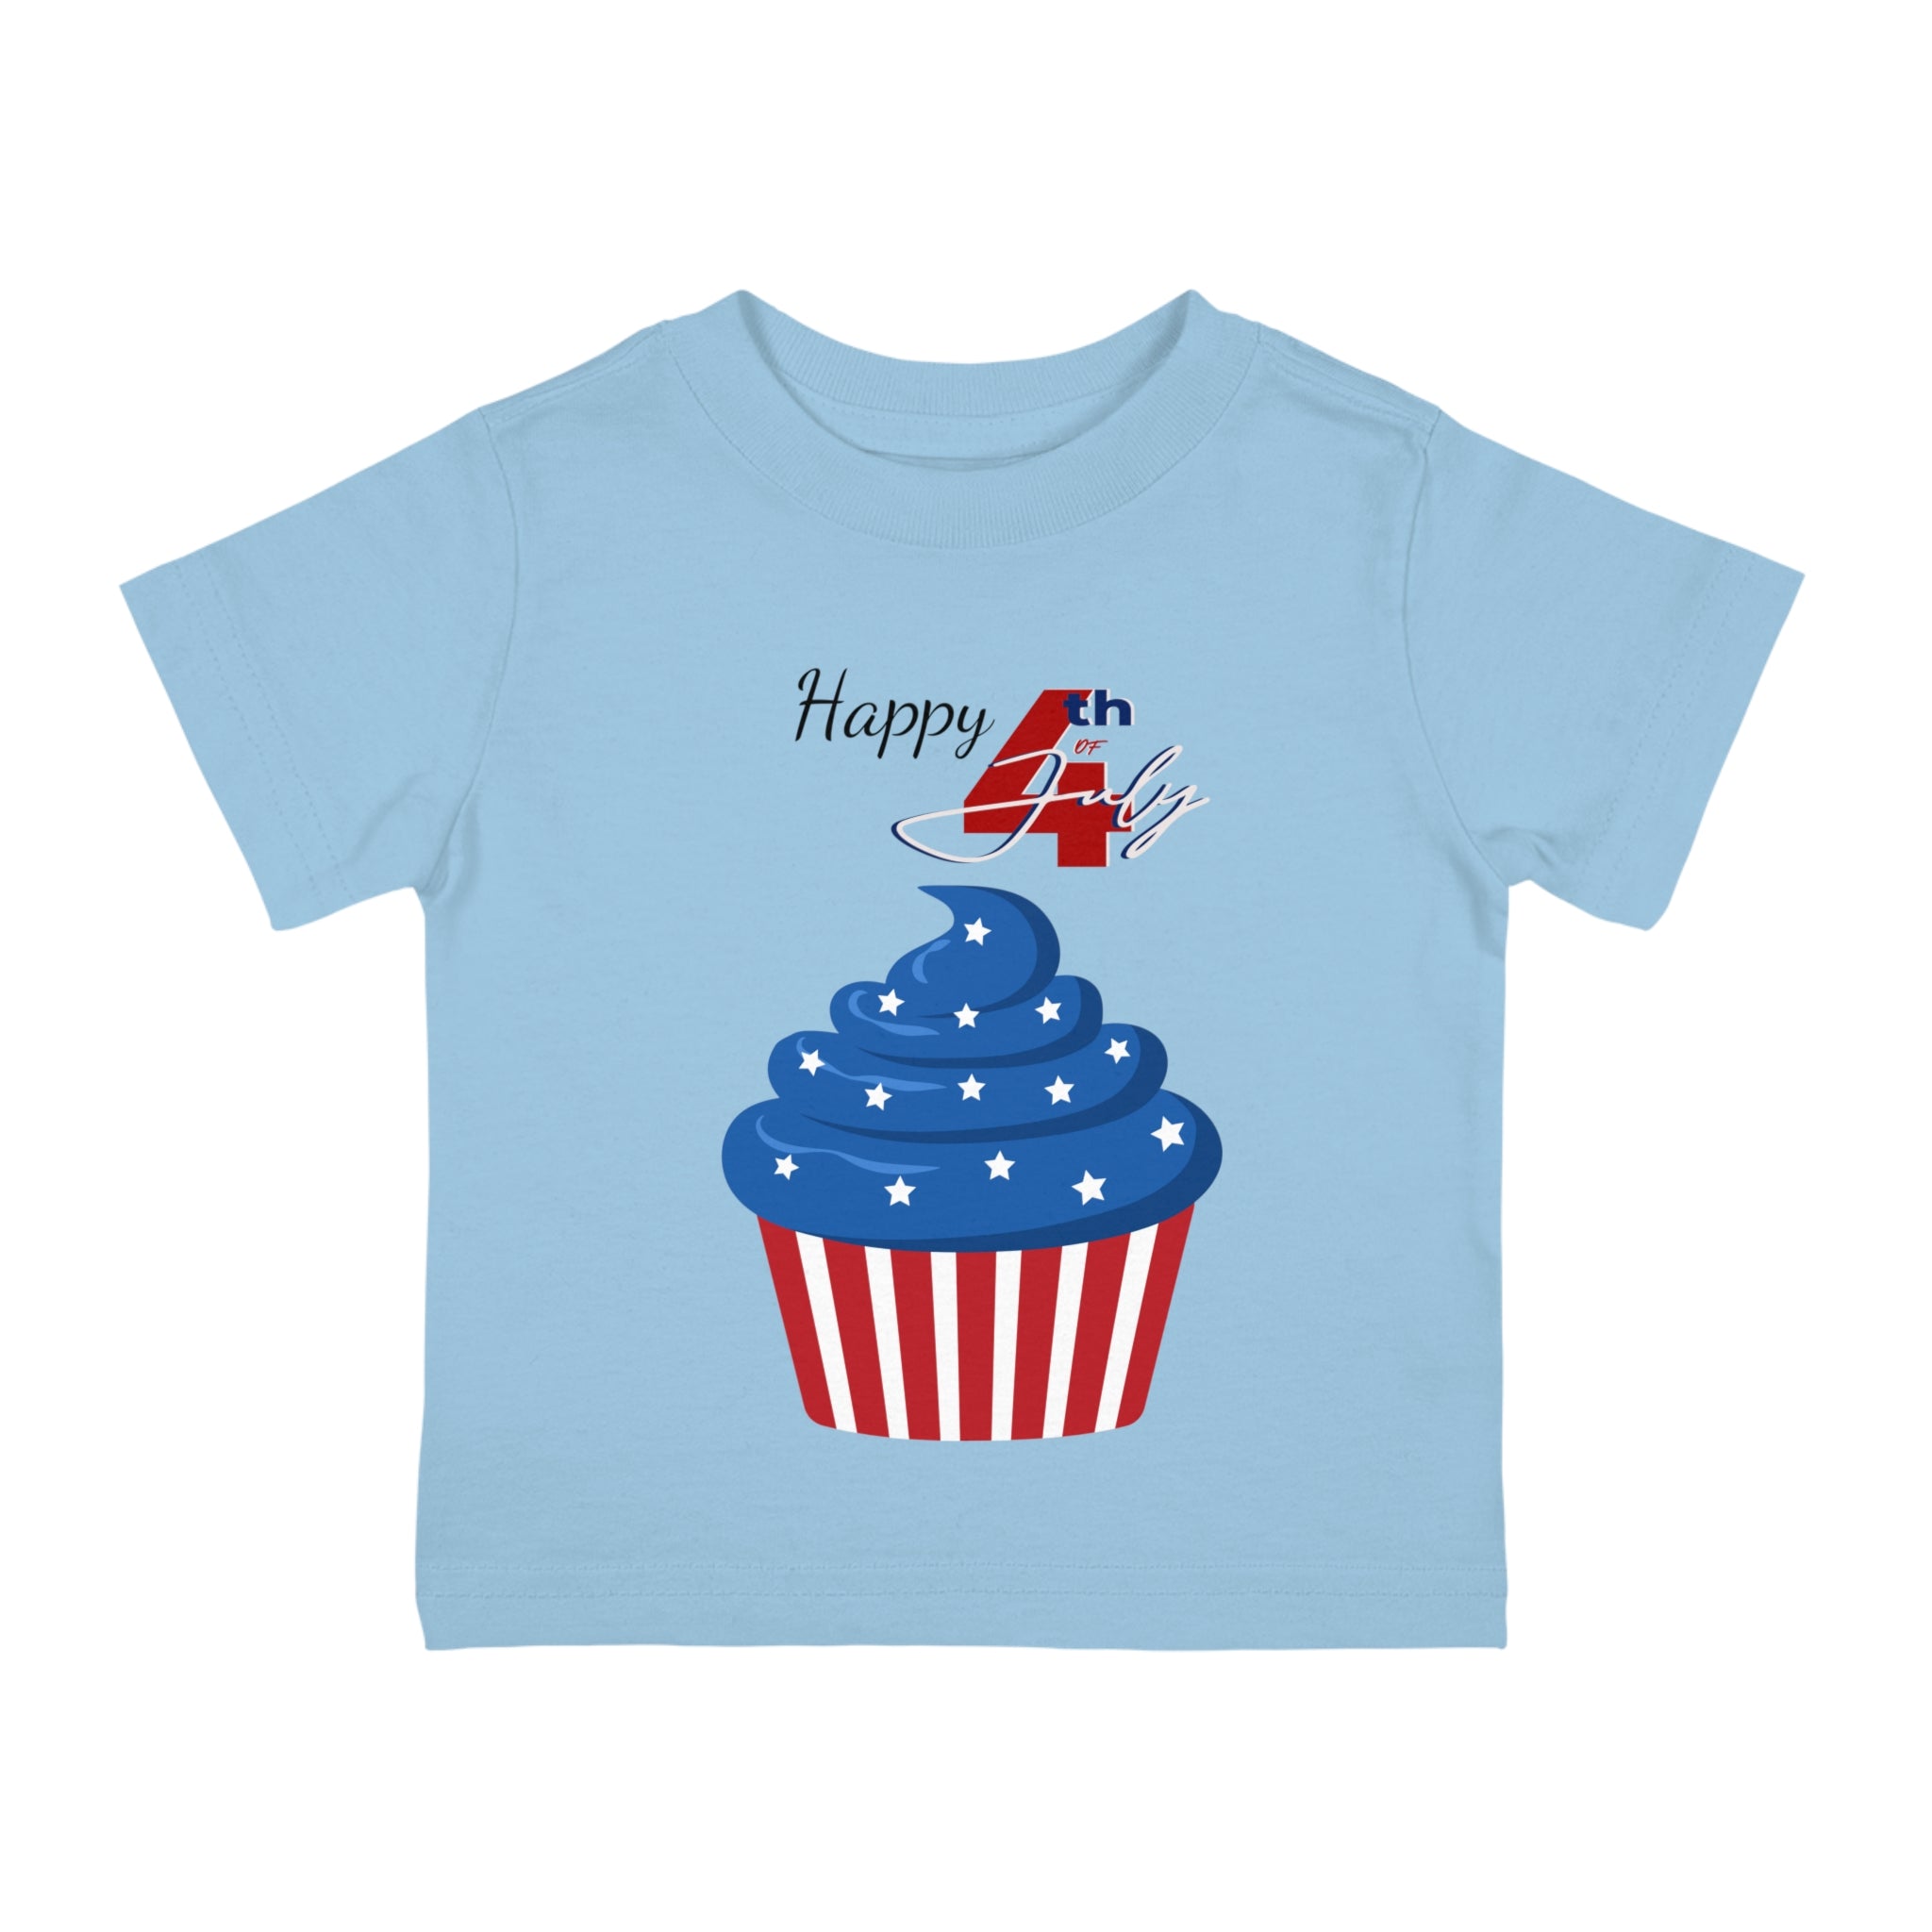 Happy 4th of July Cupcake Infant Shirt, Baby Tee, Infant Tee